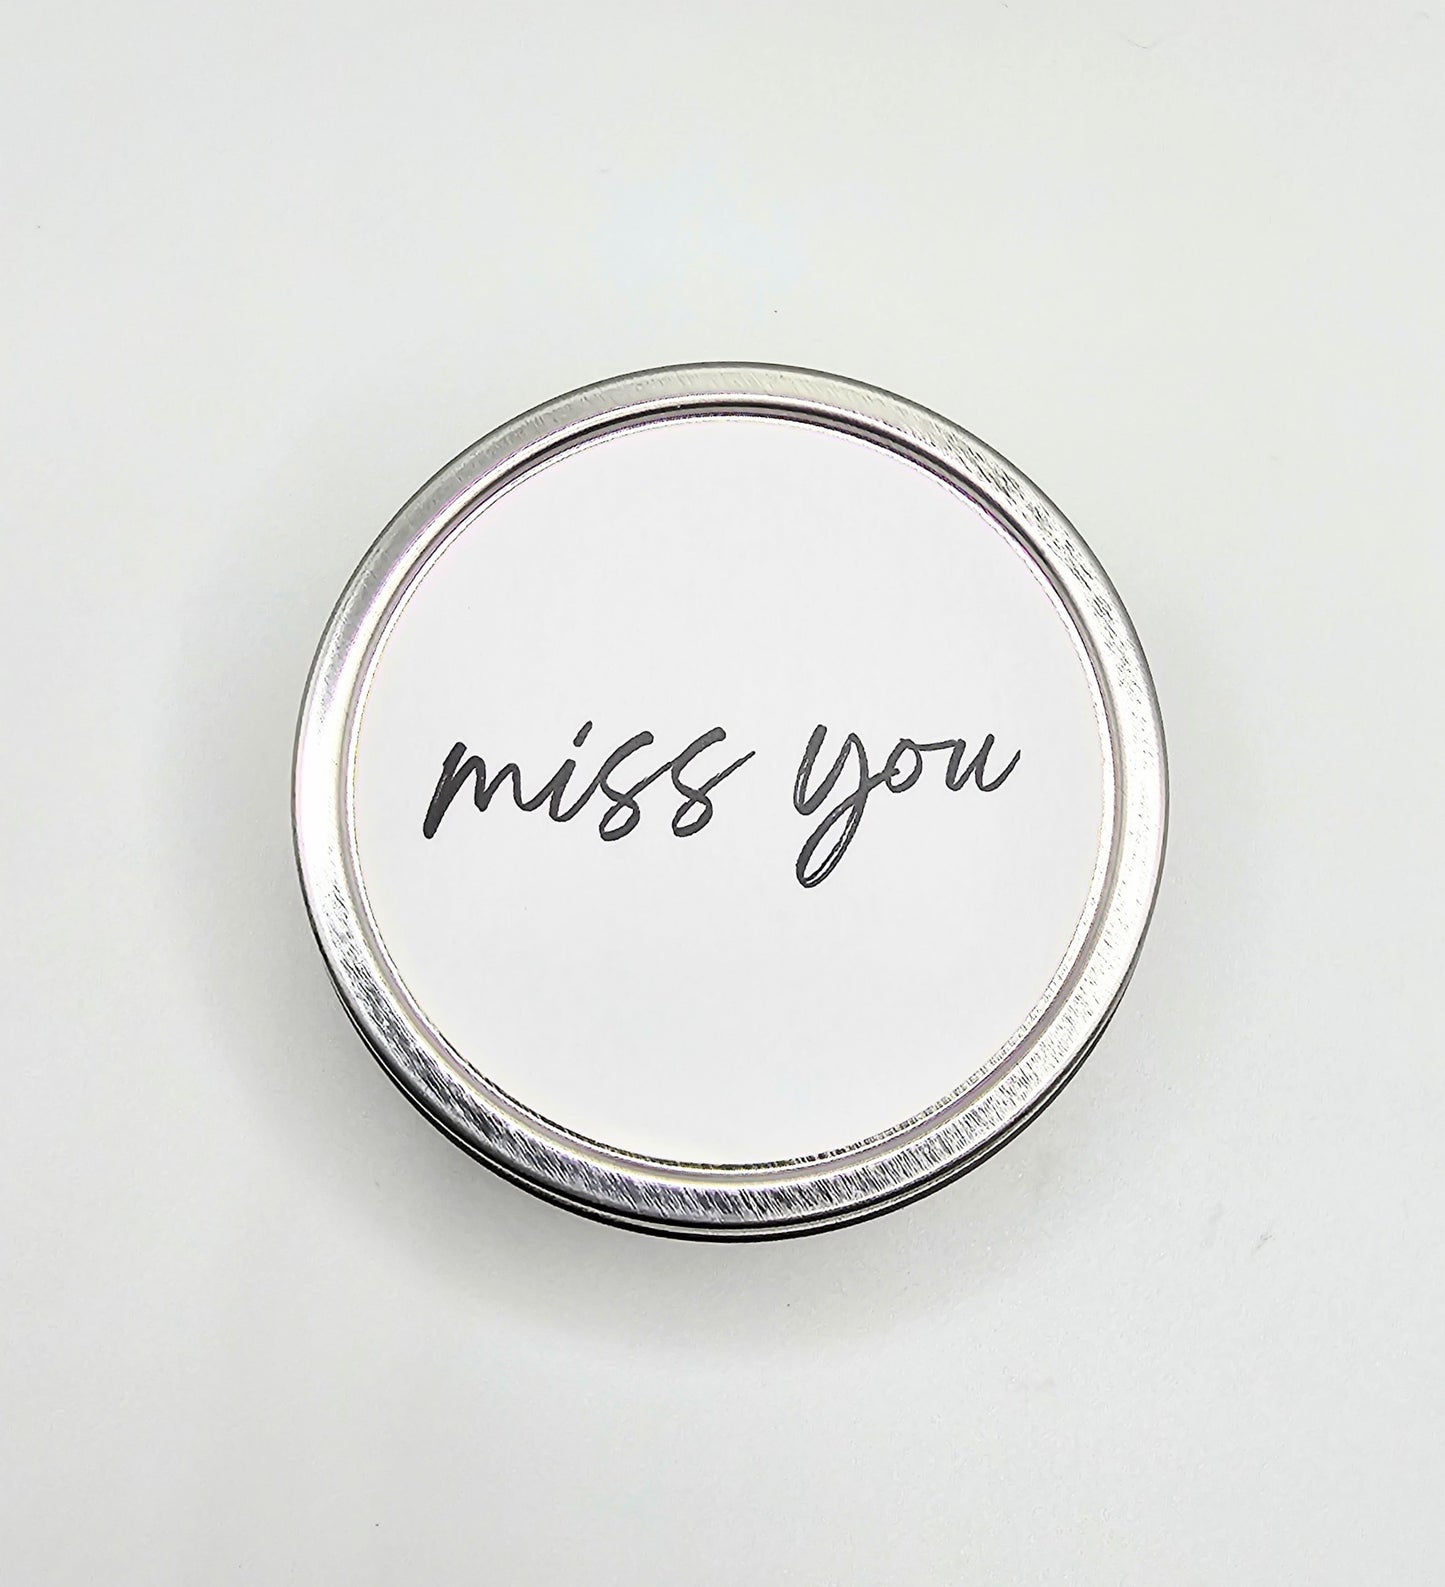 "miss you"